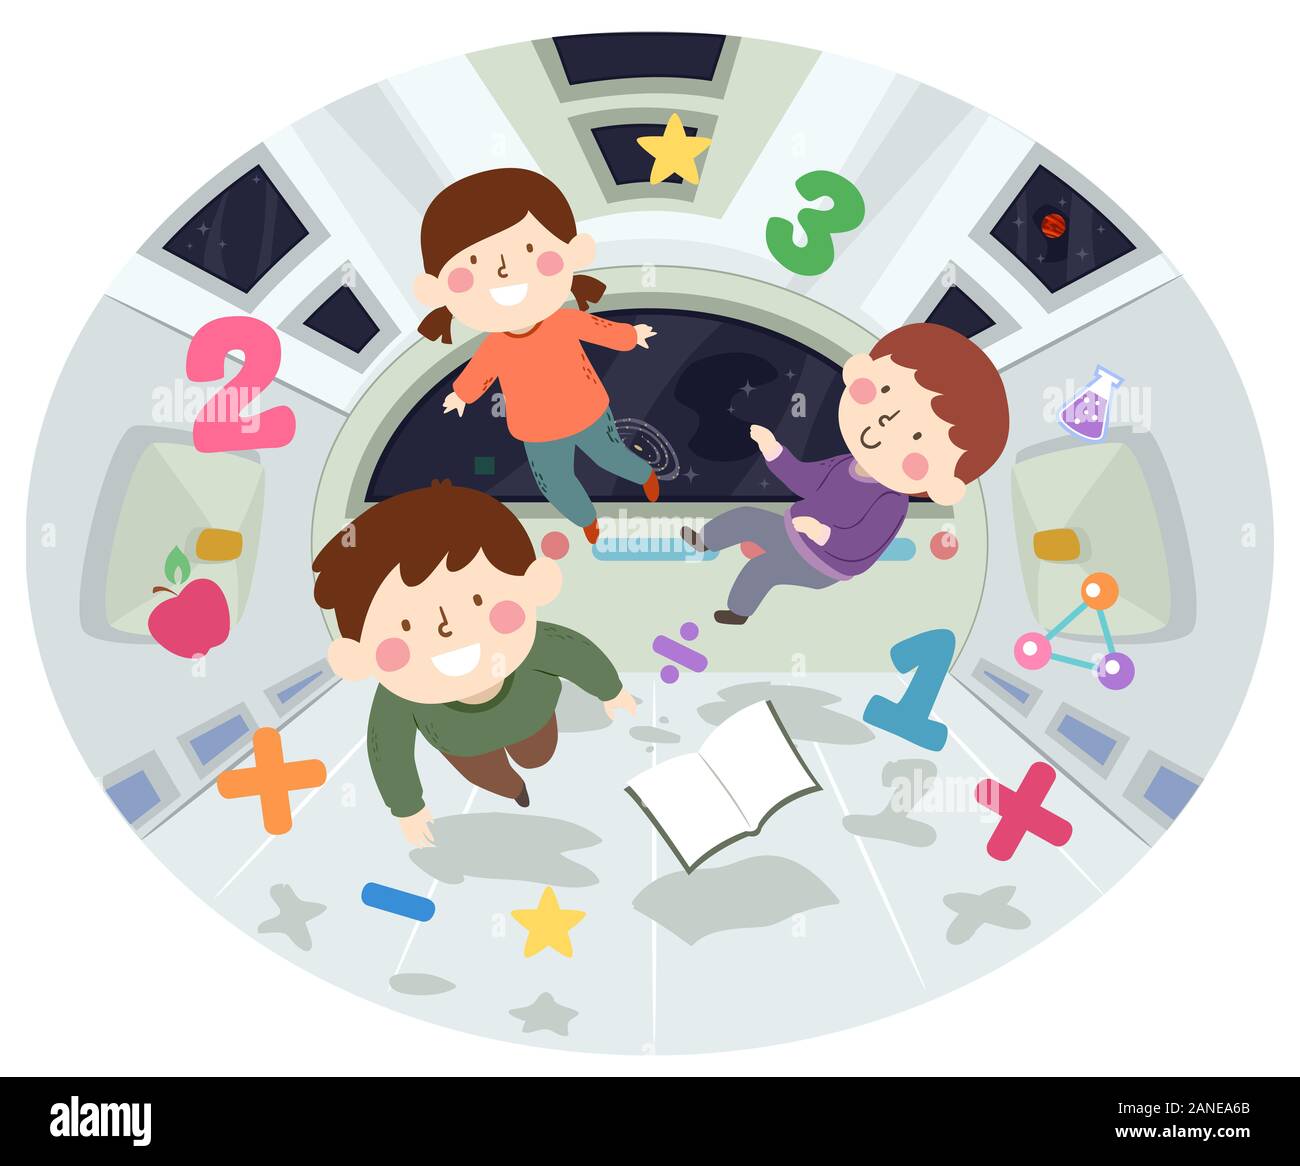 Illustration of Kids Floating Inside a Space Craft with Numbers and Education Elements Stock Photo